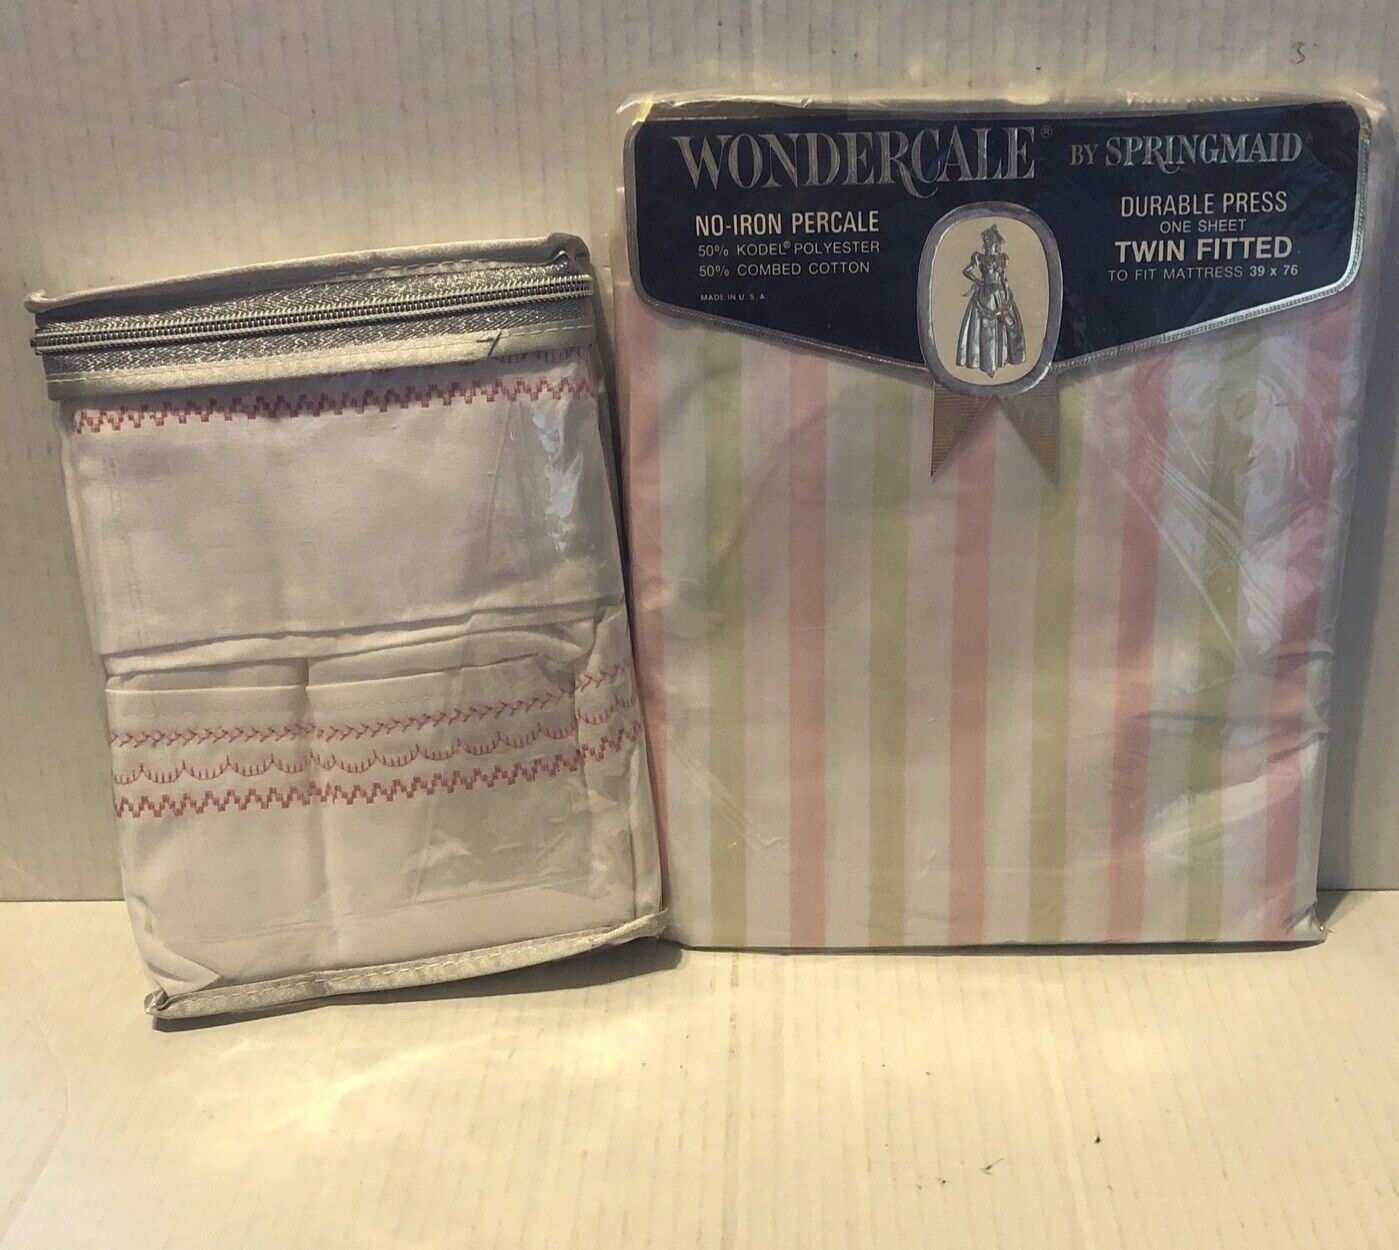 Wondercale Springmaid Twin Fitted Sheet NEW Pink Green Stripe & Pillowcase